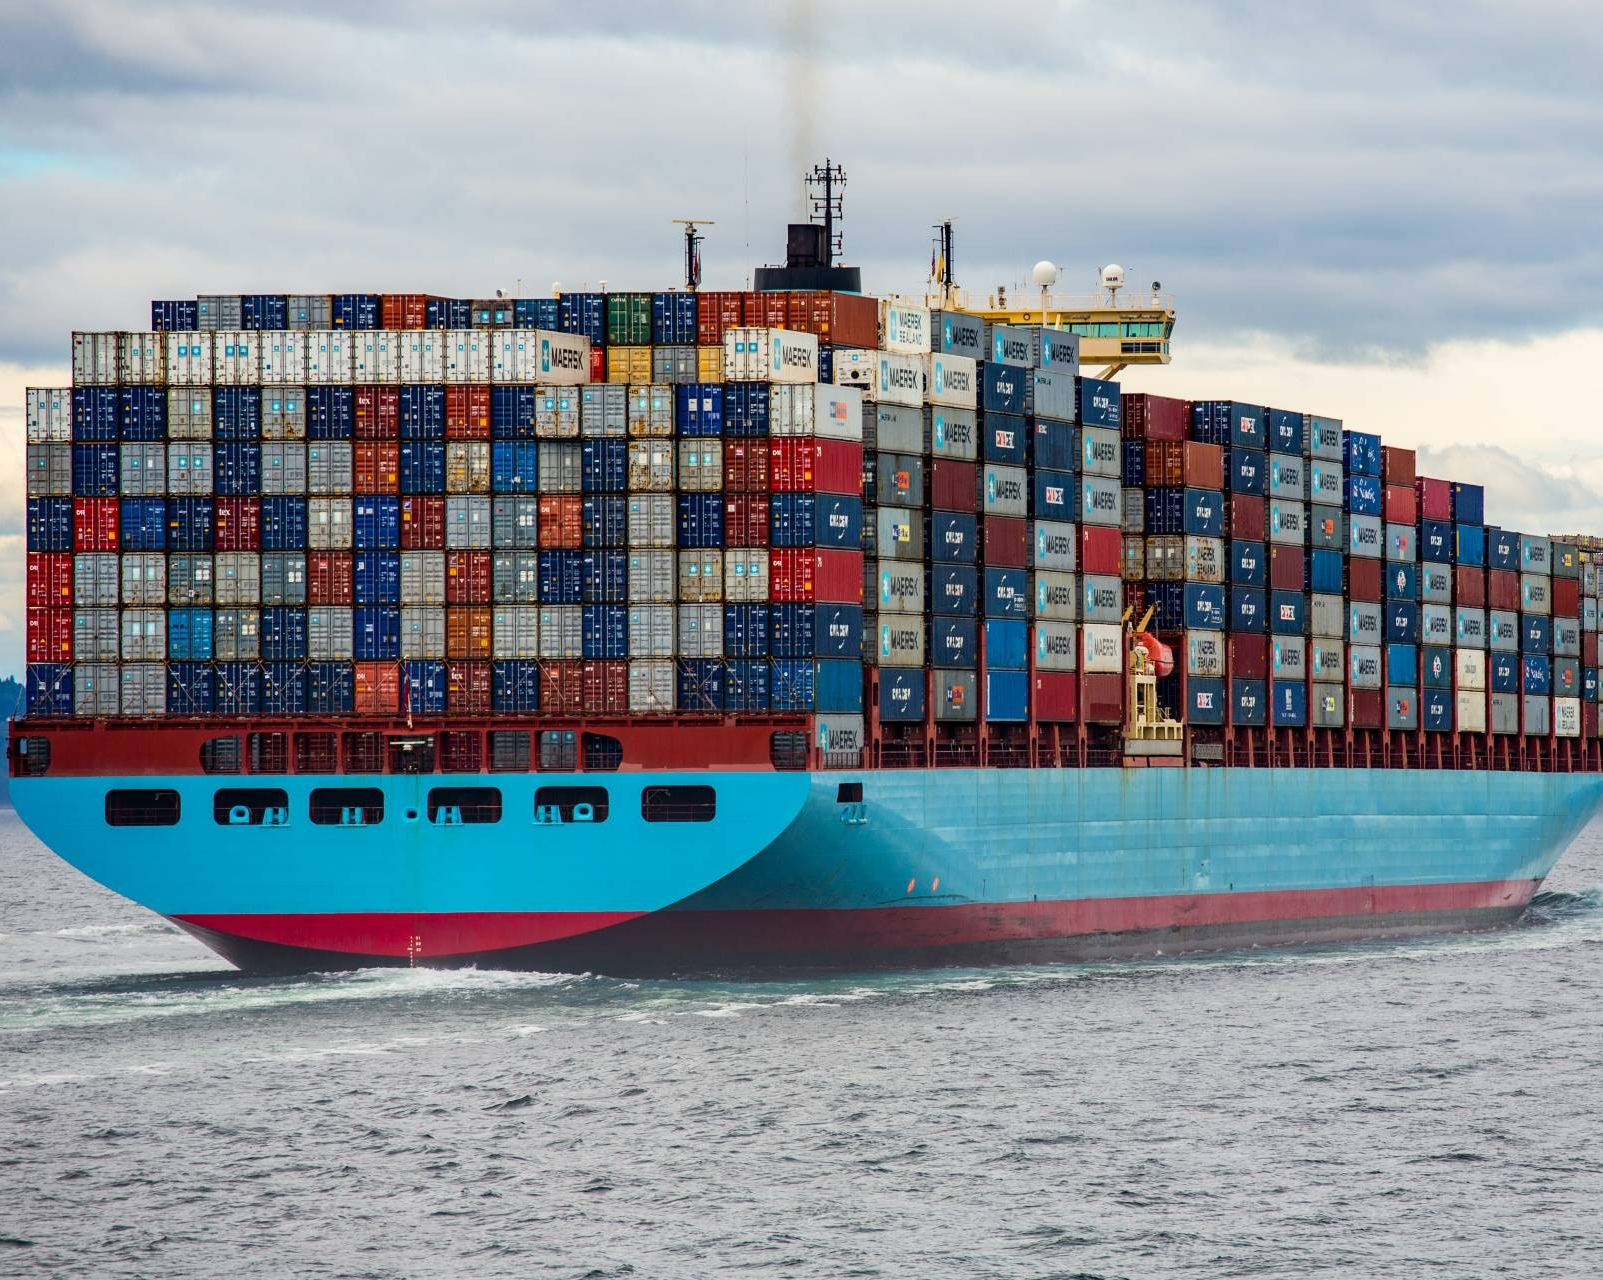 containerized cargo on an ocean freight ship
